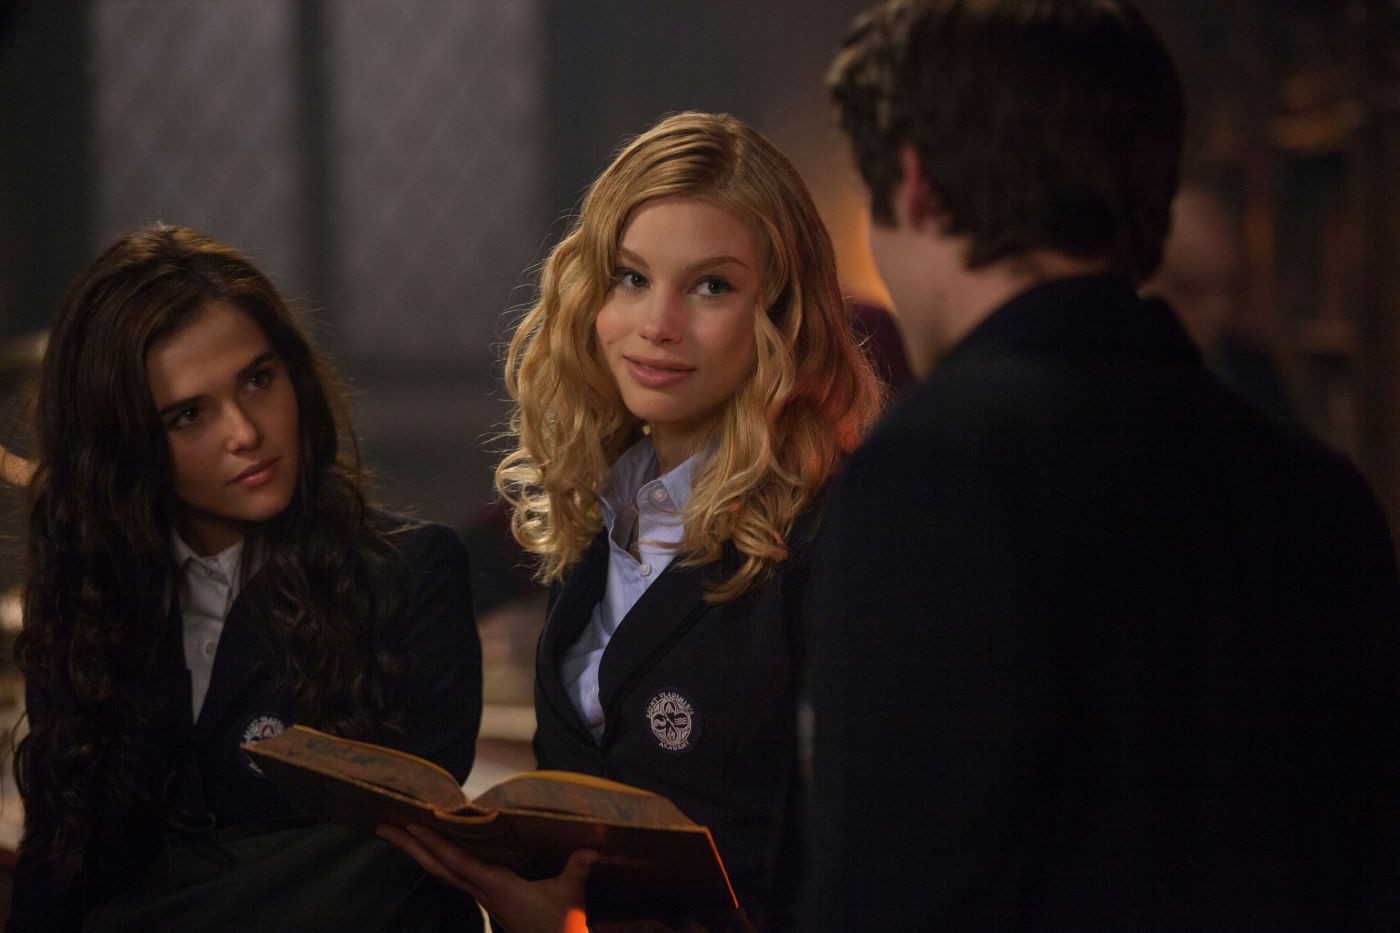 Zoey Deutch stars as Rose Hathaway and Lucy Fry stars as Lissa Dragomir in The Weinstein Company's Vampire Academy (2014)